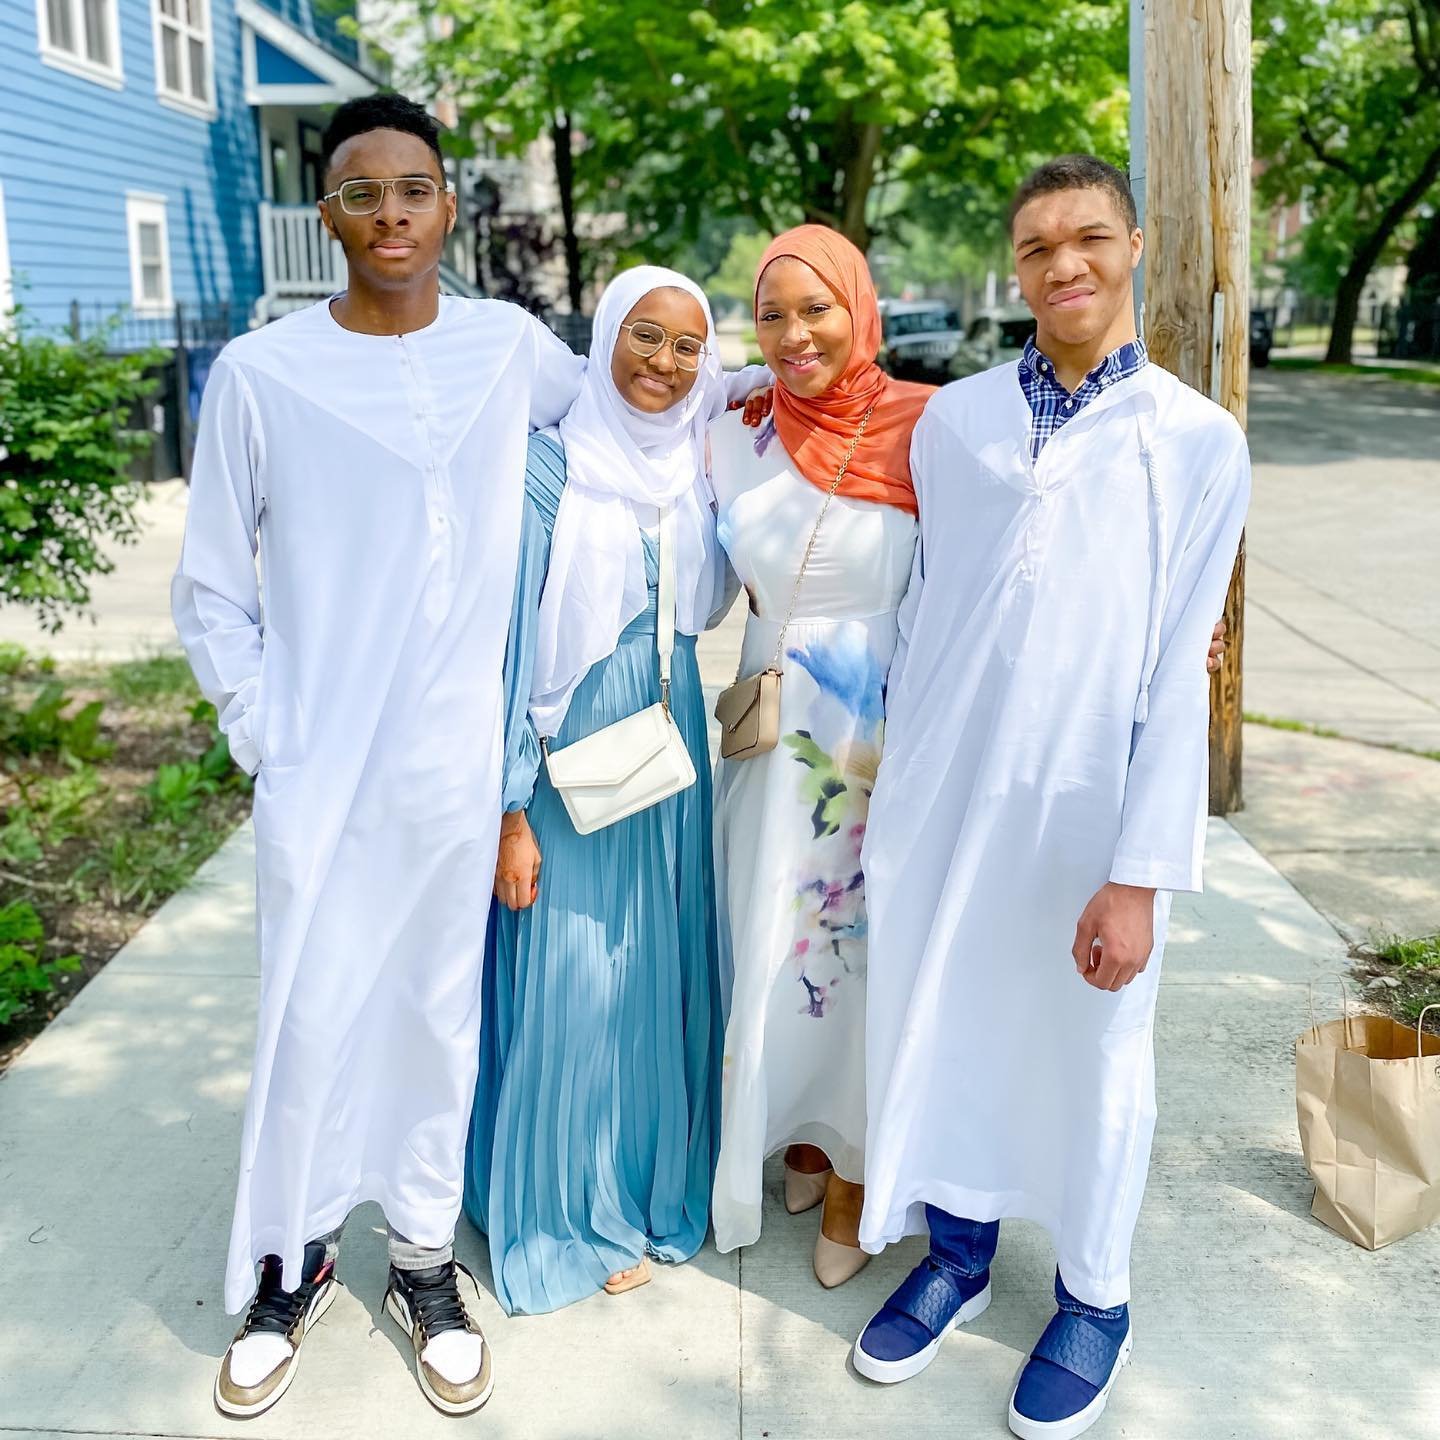 @mommyweek's family shining in crisp white and sky blue